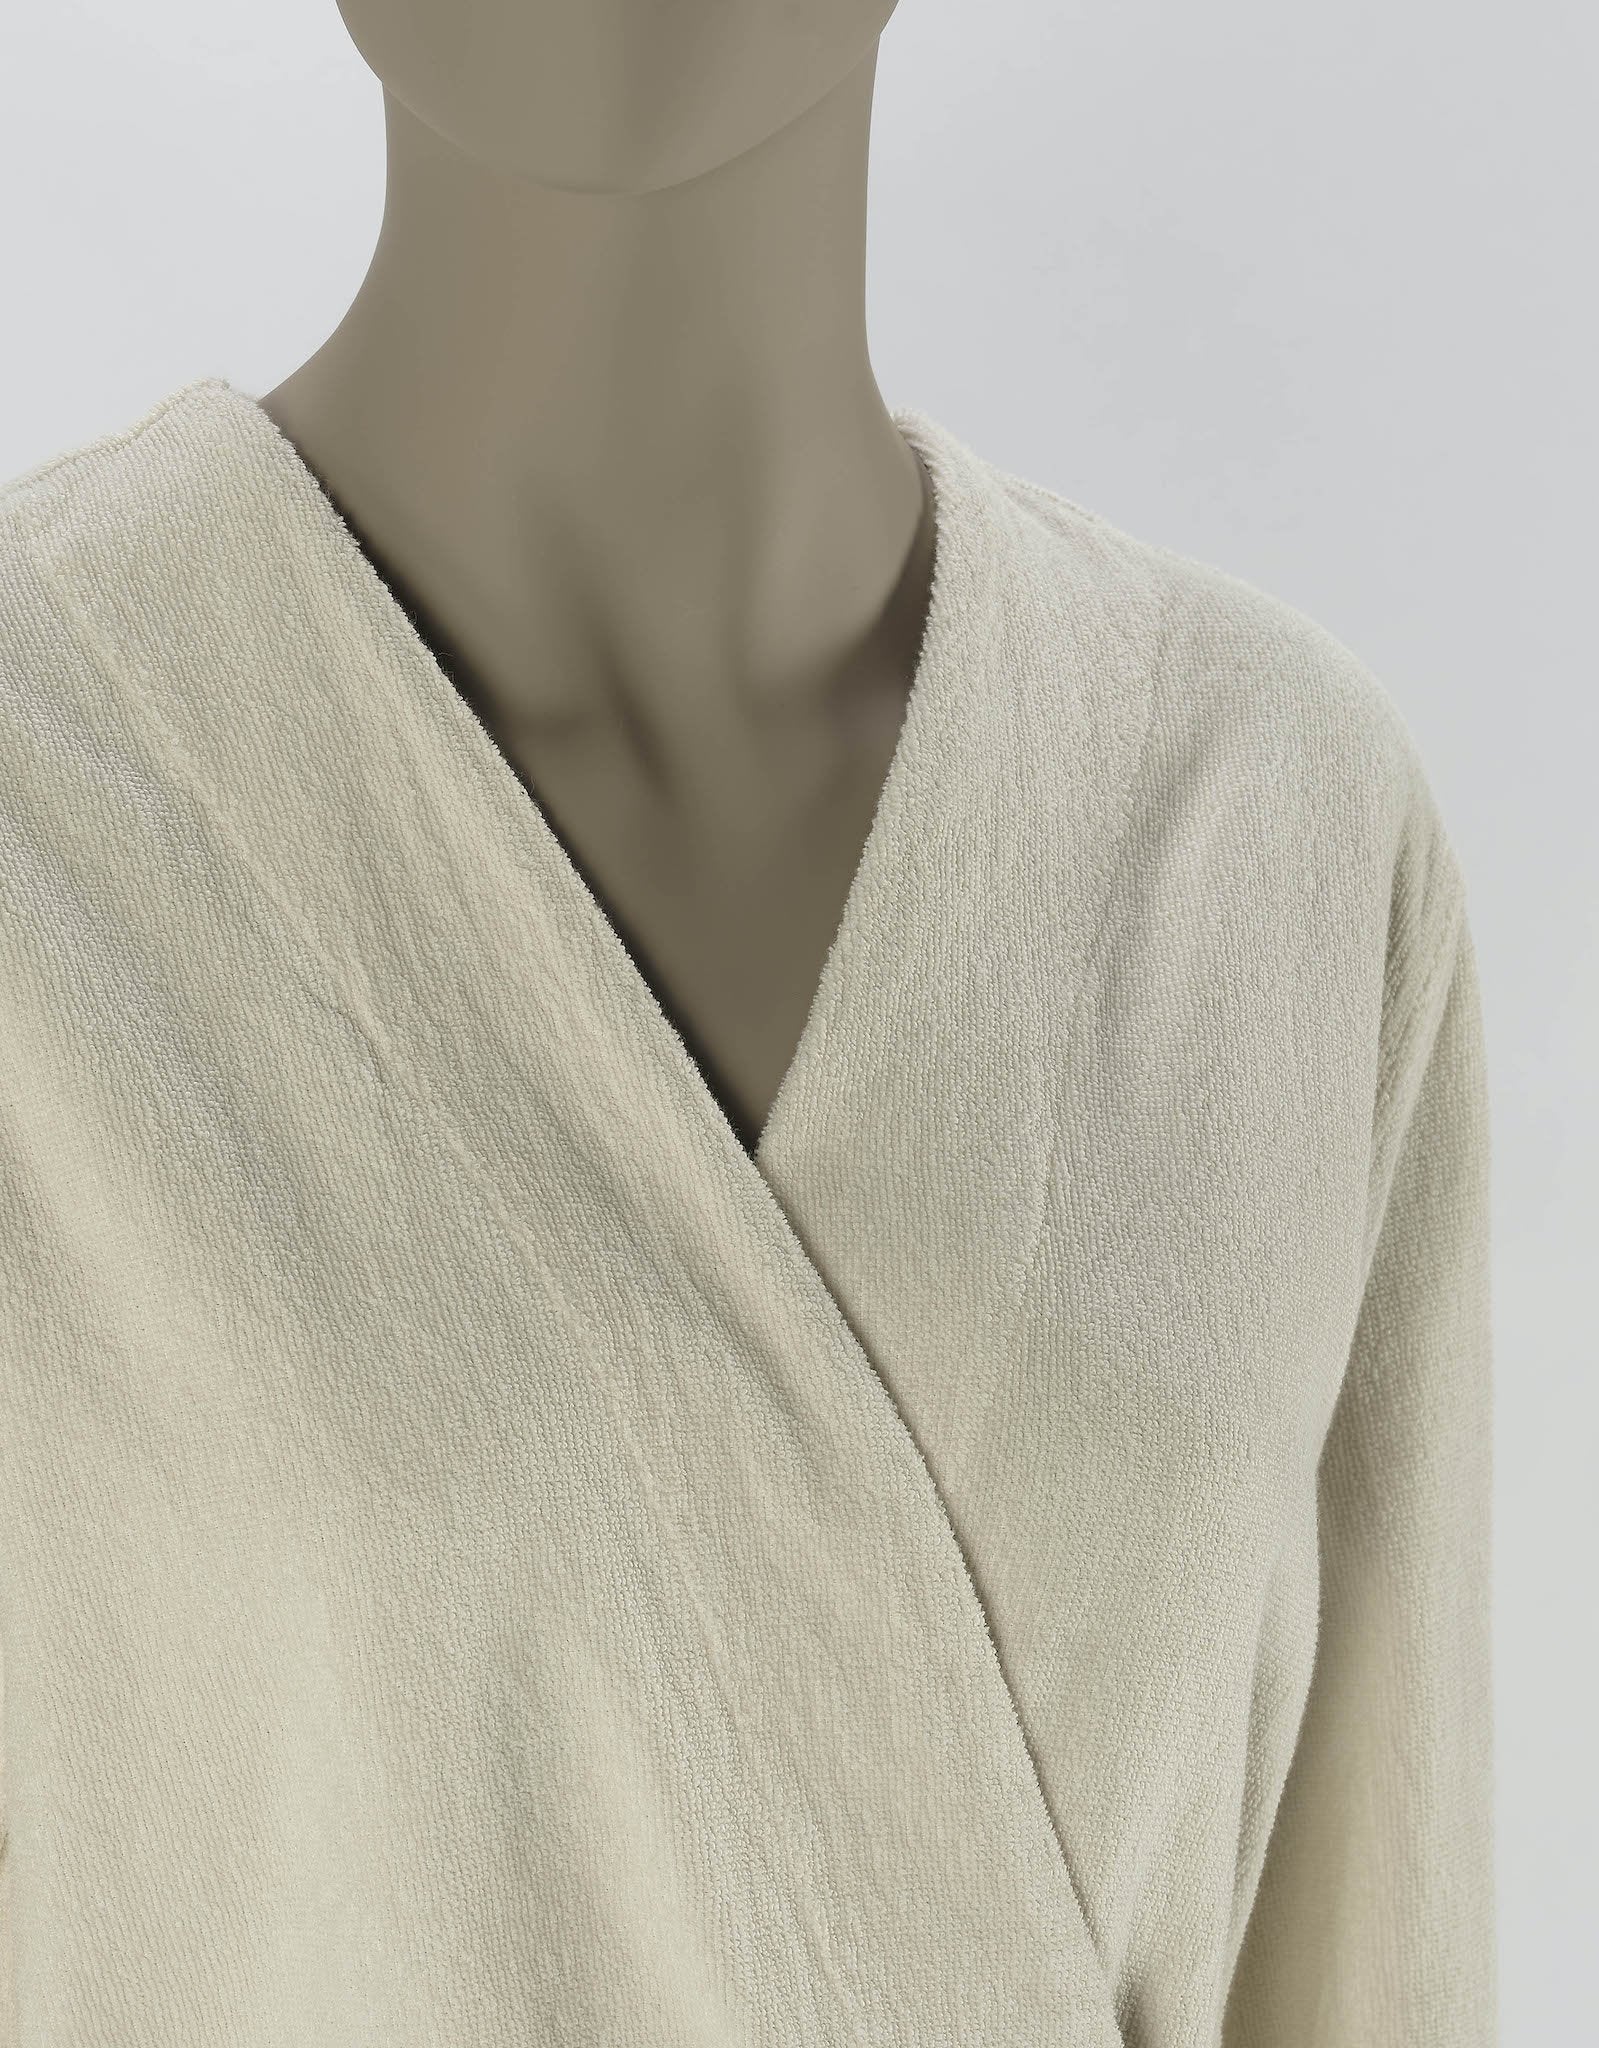 Fig Linens - Spa Robe by Abyss and Habidecor - Collar